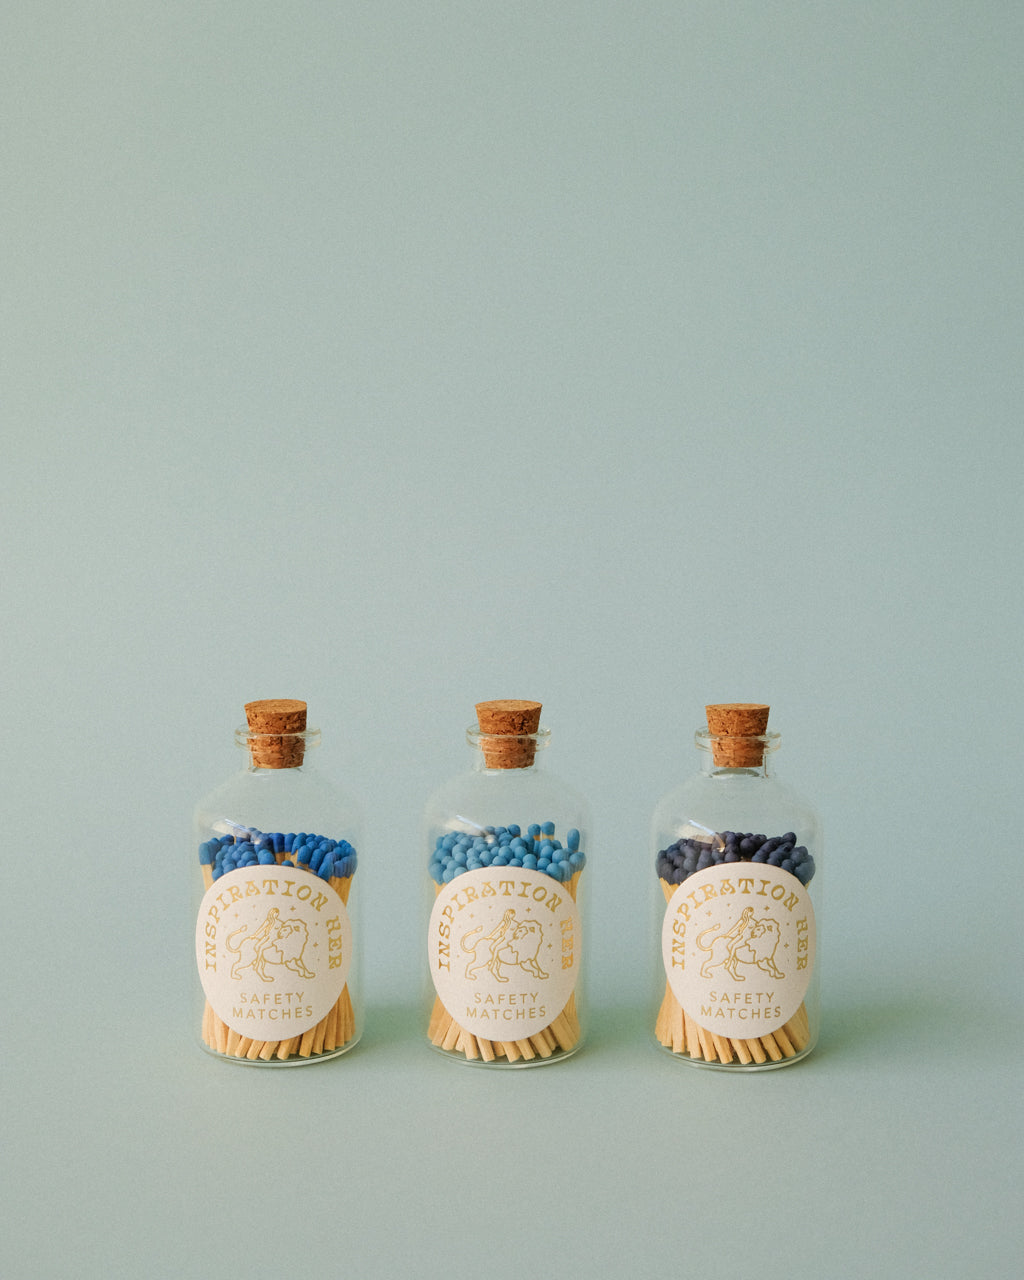 Decorative Safety Matches in a Glass Jar - Sky Blue | Inspiration Her